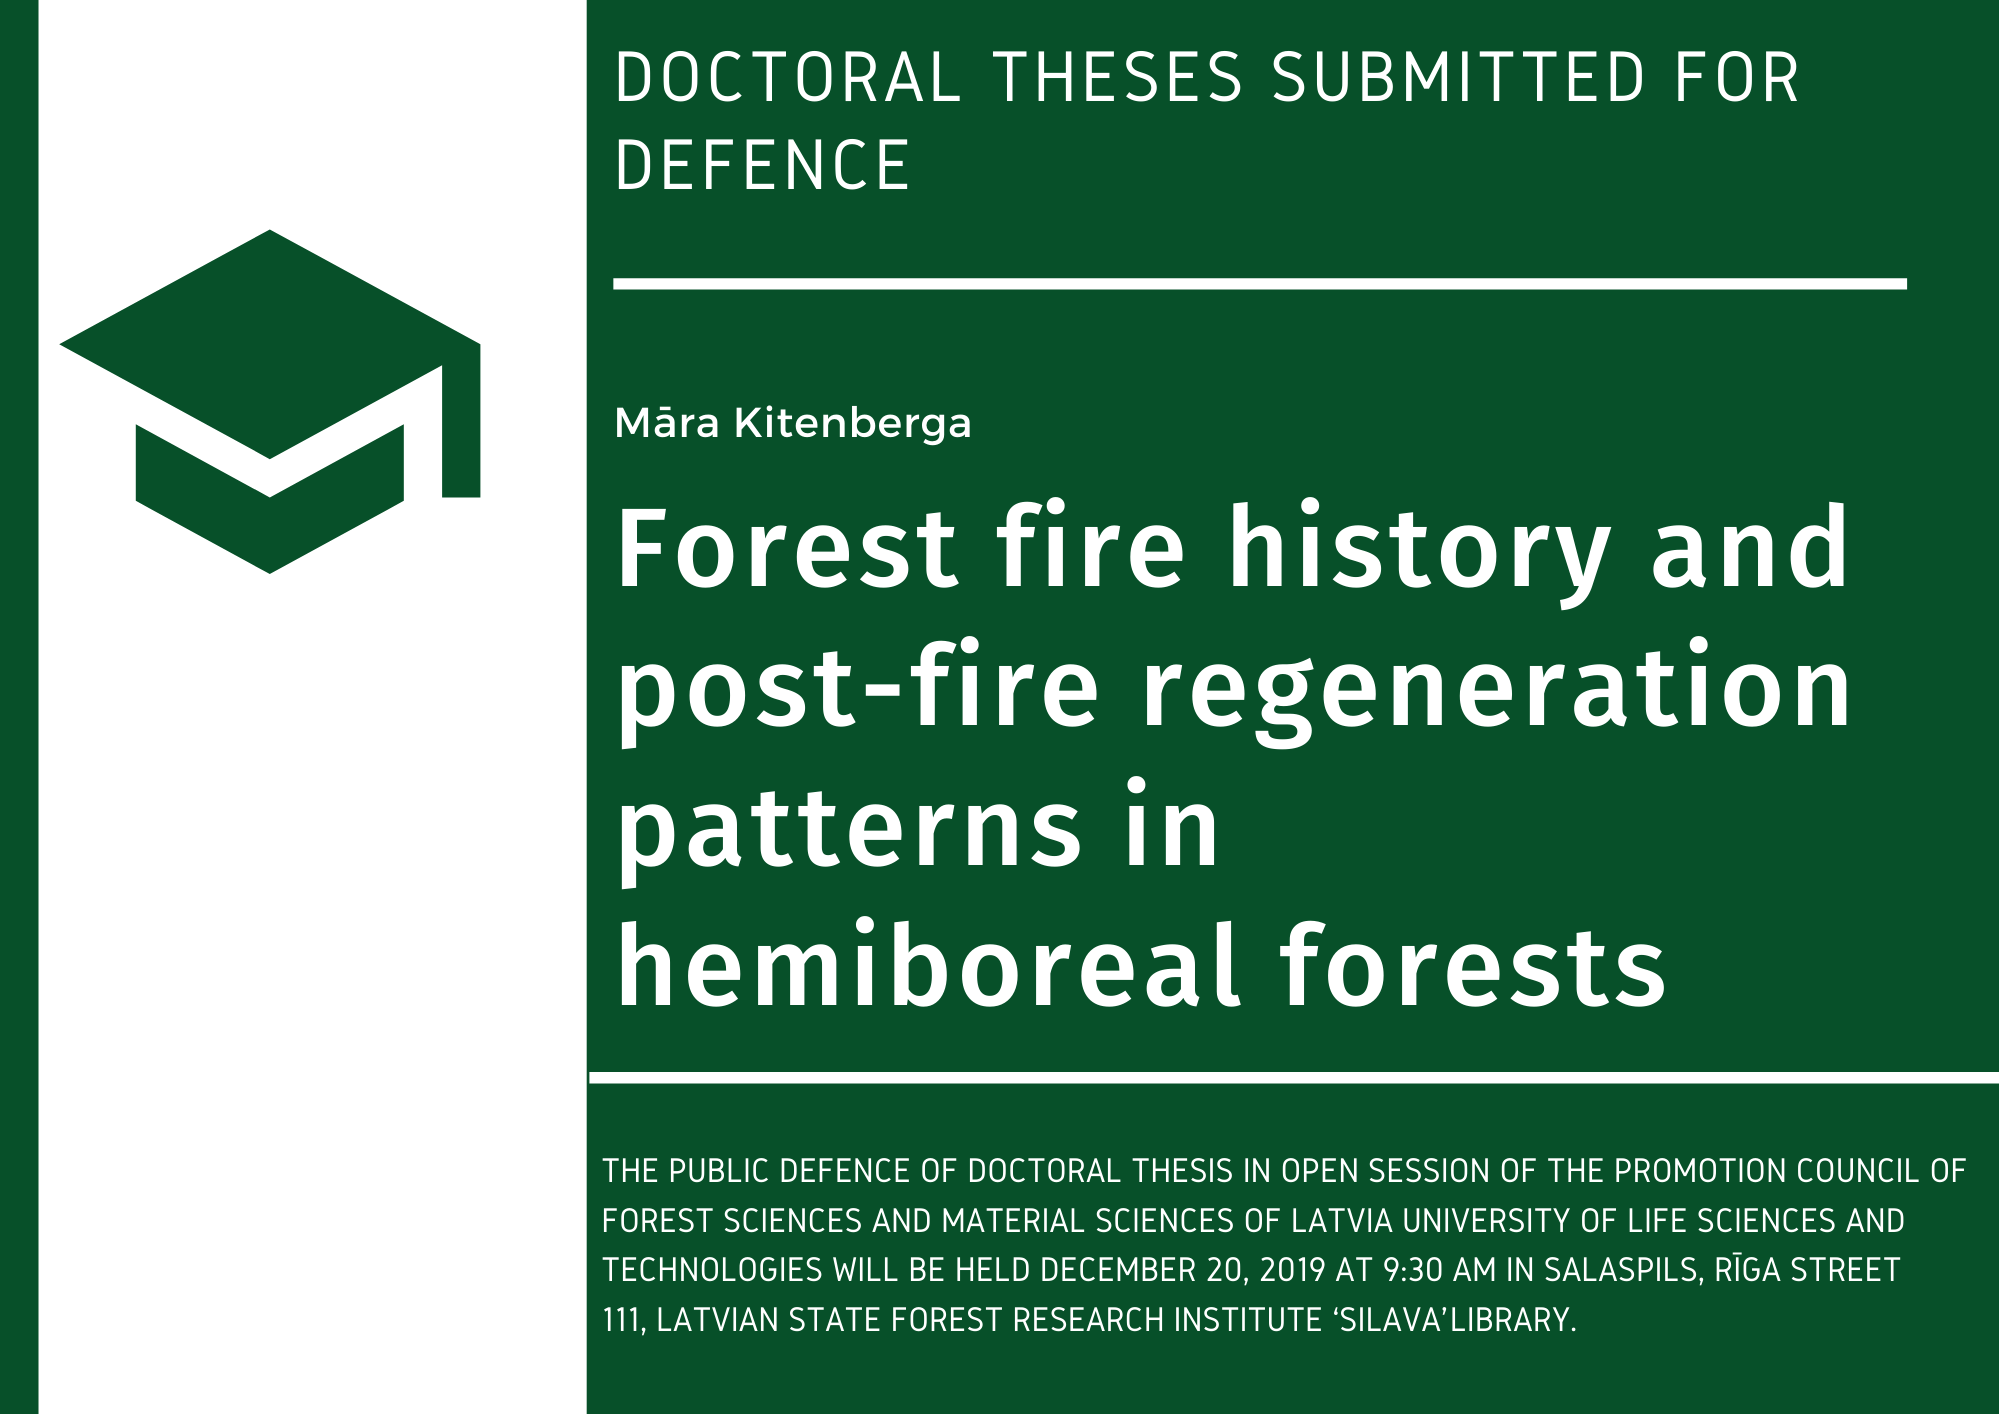 Māra Kitenberga. Forest fire history and post-fire regeneration patterns in hemiboreal forests : Doctoral thesis for acquiring the Doctor’s degree of Forest sciences. Salaspils, 2019. 